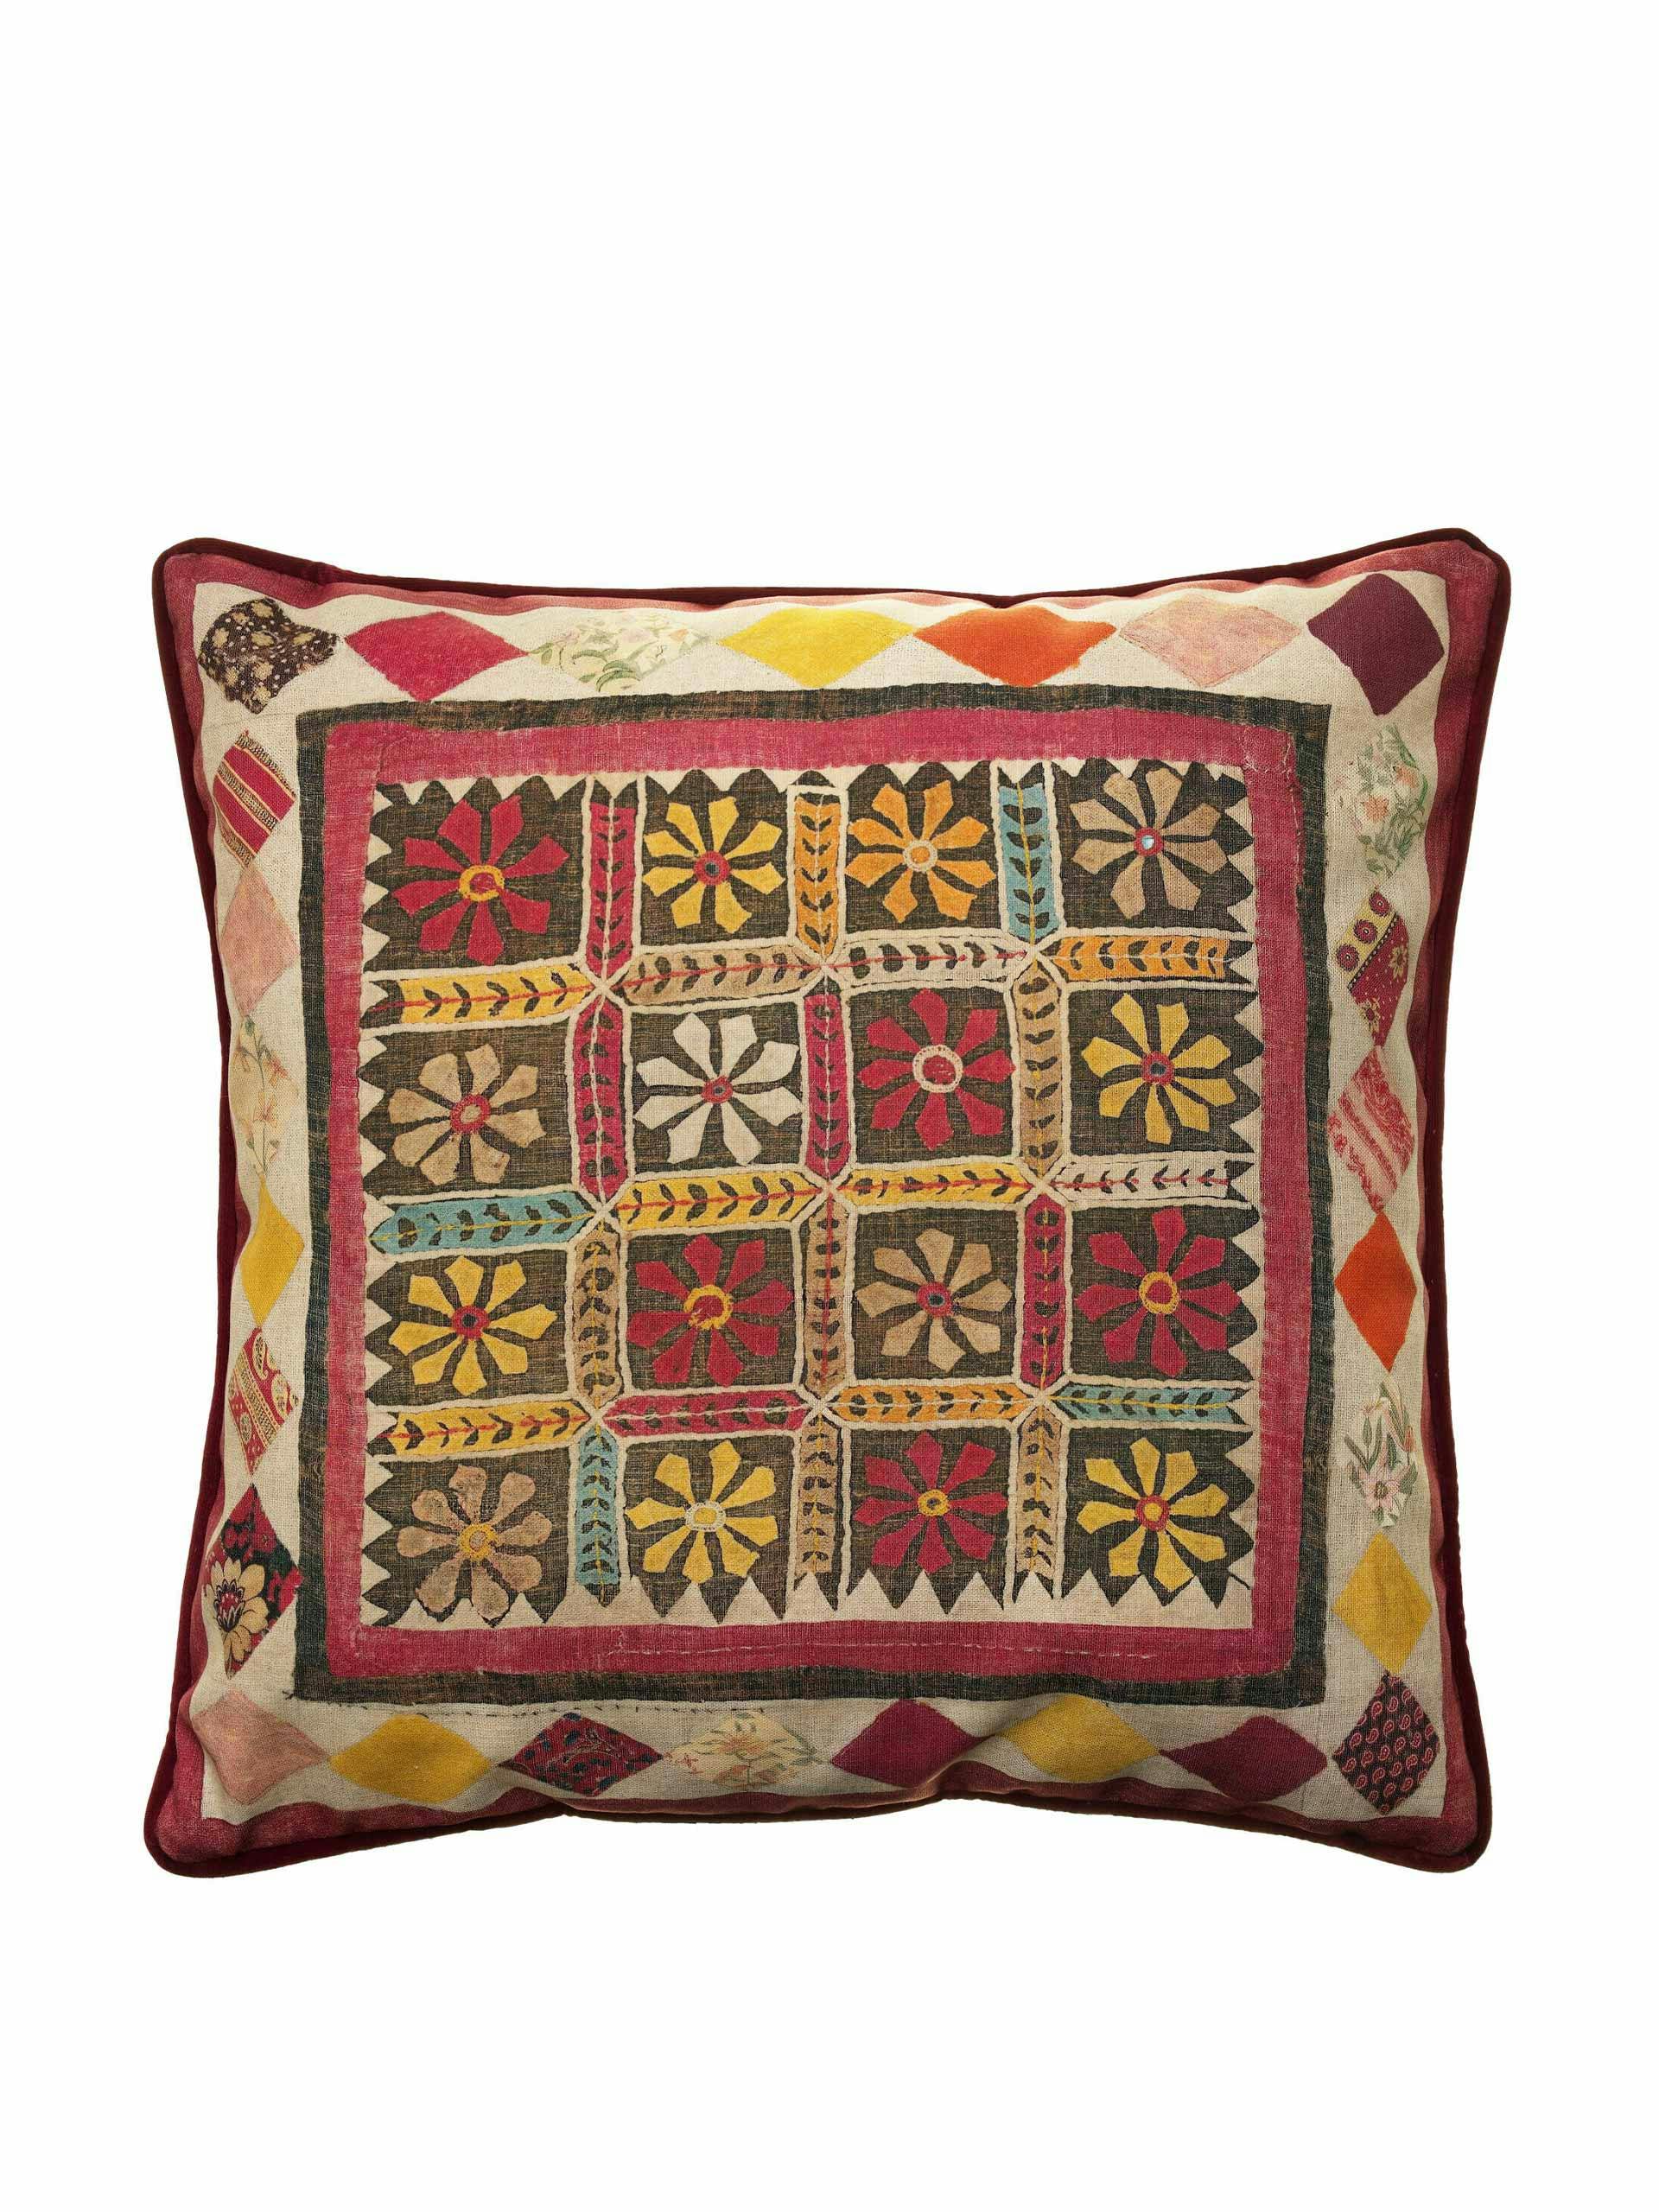 Antique inspired floral cushion